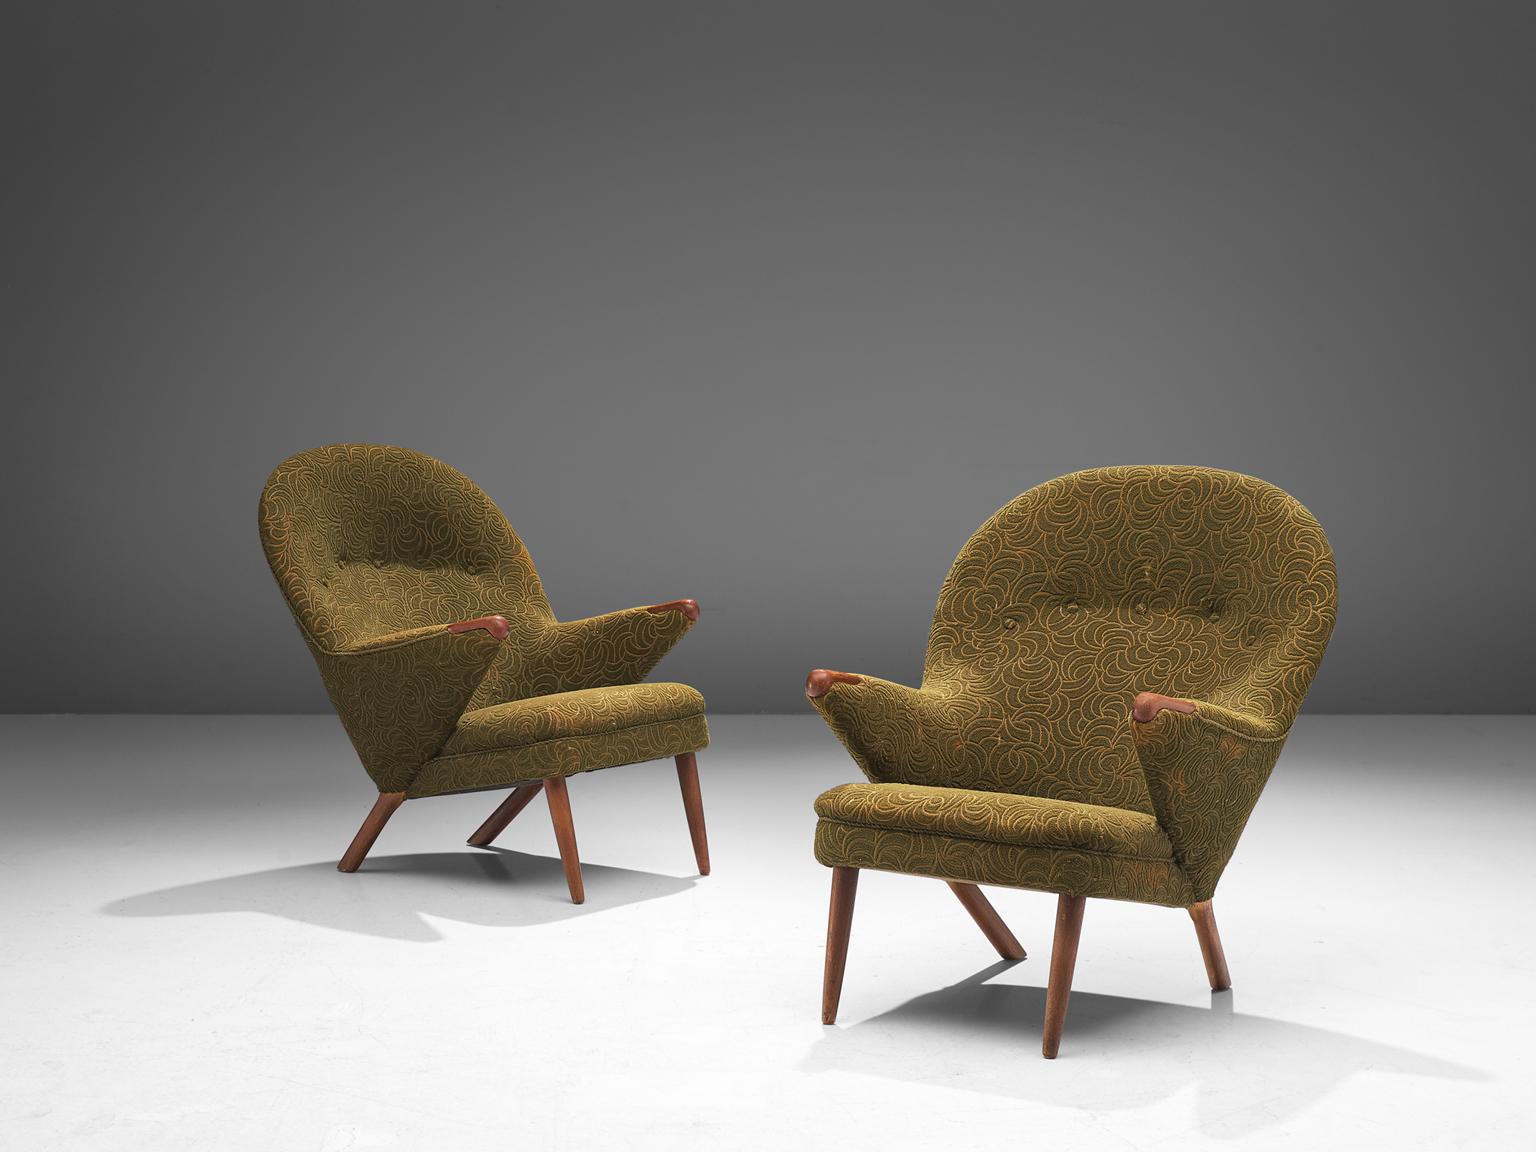 Pair of lounge chairs, oak and fabric, Denmark, 1960's

These lounge chairs have an open expression and an elegant shape due to its round shapes. The high, rounded backrest is stunning. The armrests have flow loosely in the seat, giving the idea